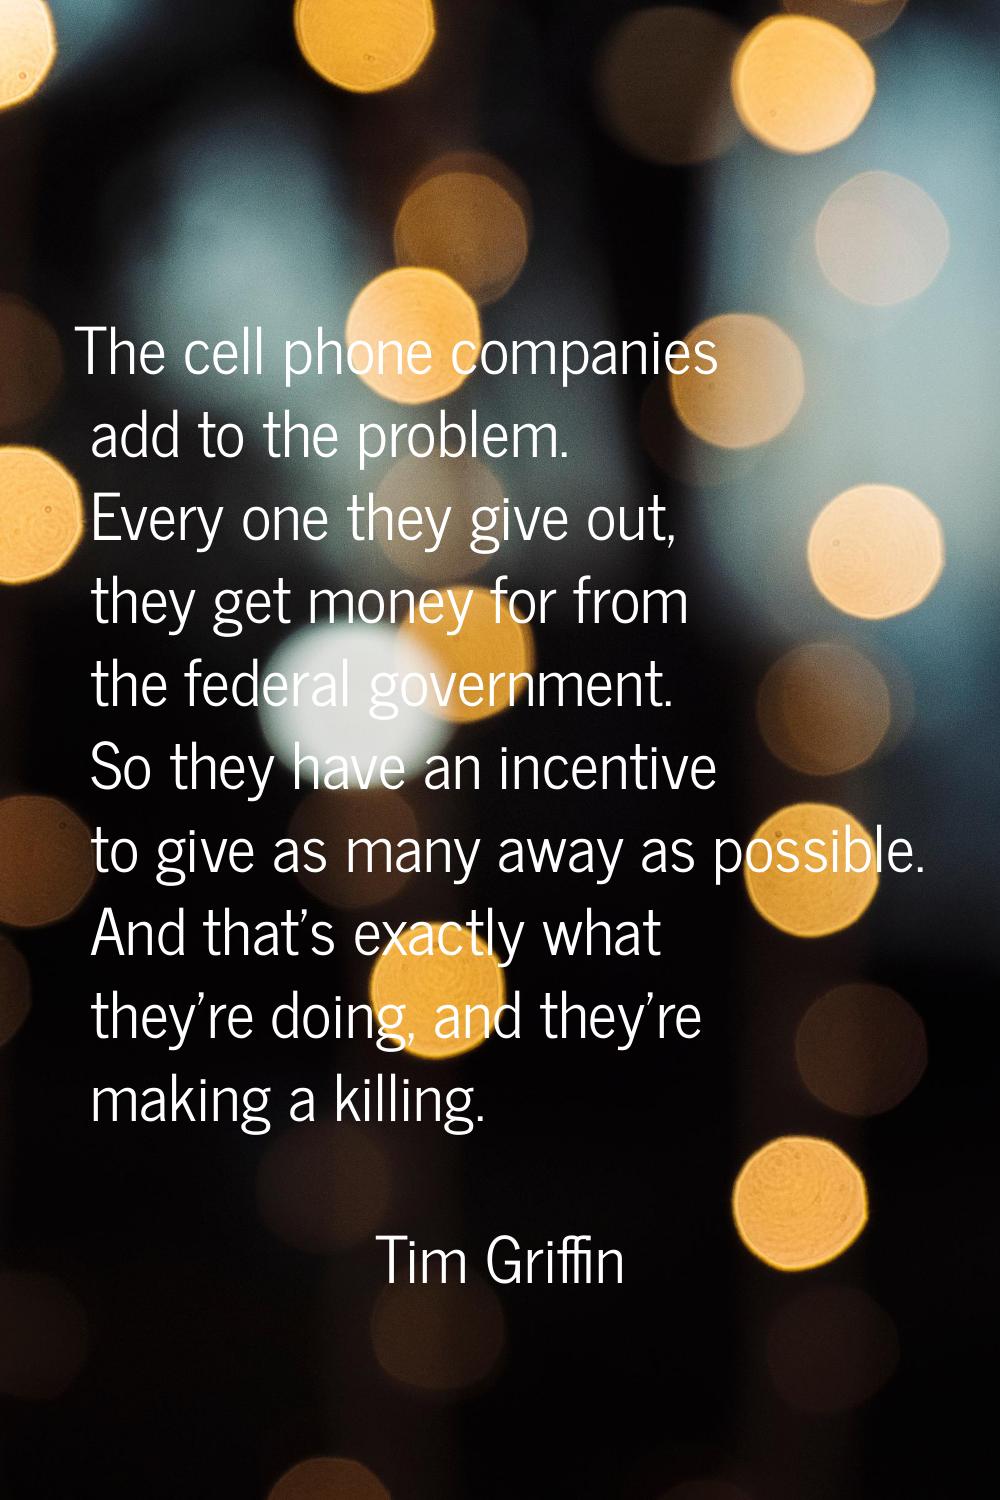 The cell phone companies add to the problem. Every one they give out, they get money for from the f